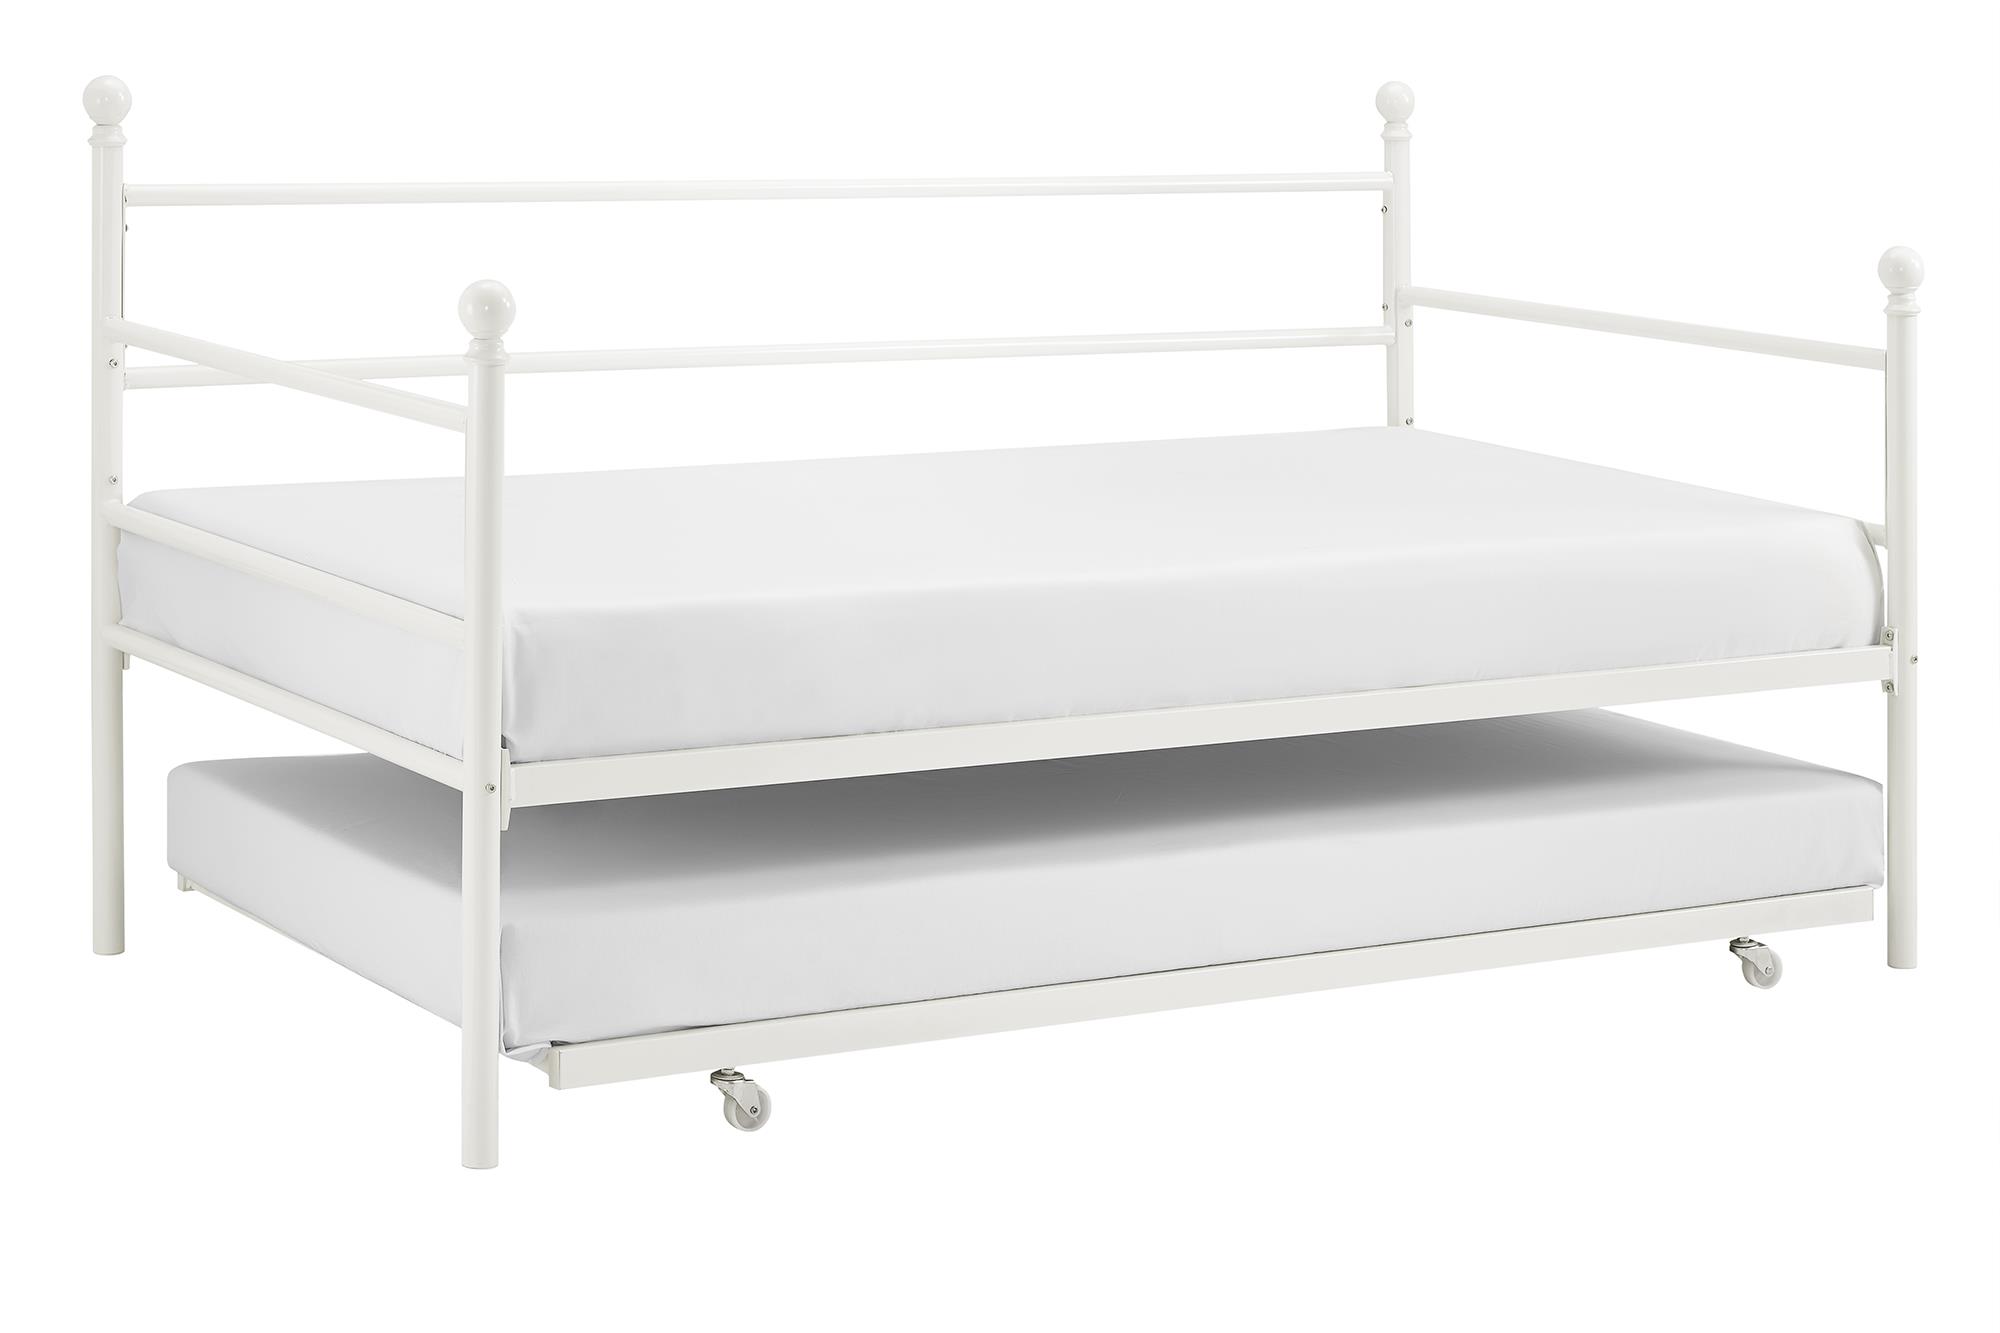 Mainstays Modern Metal Daybed with Trundle, Twin Size Frame, Off White - image 4 of 18